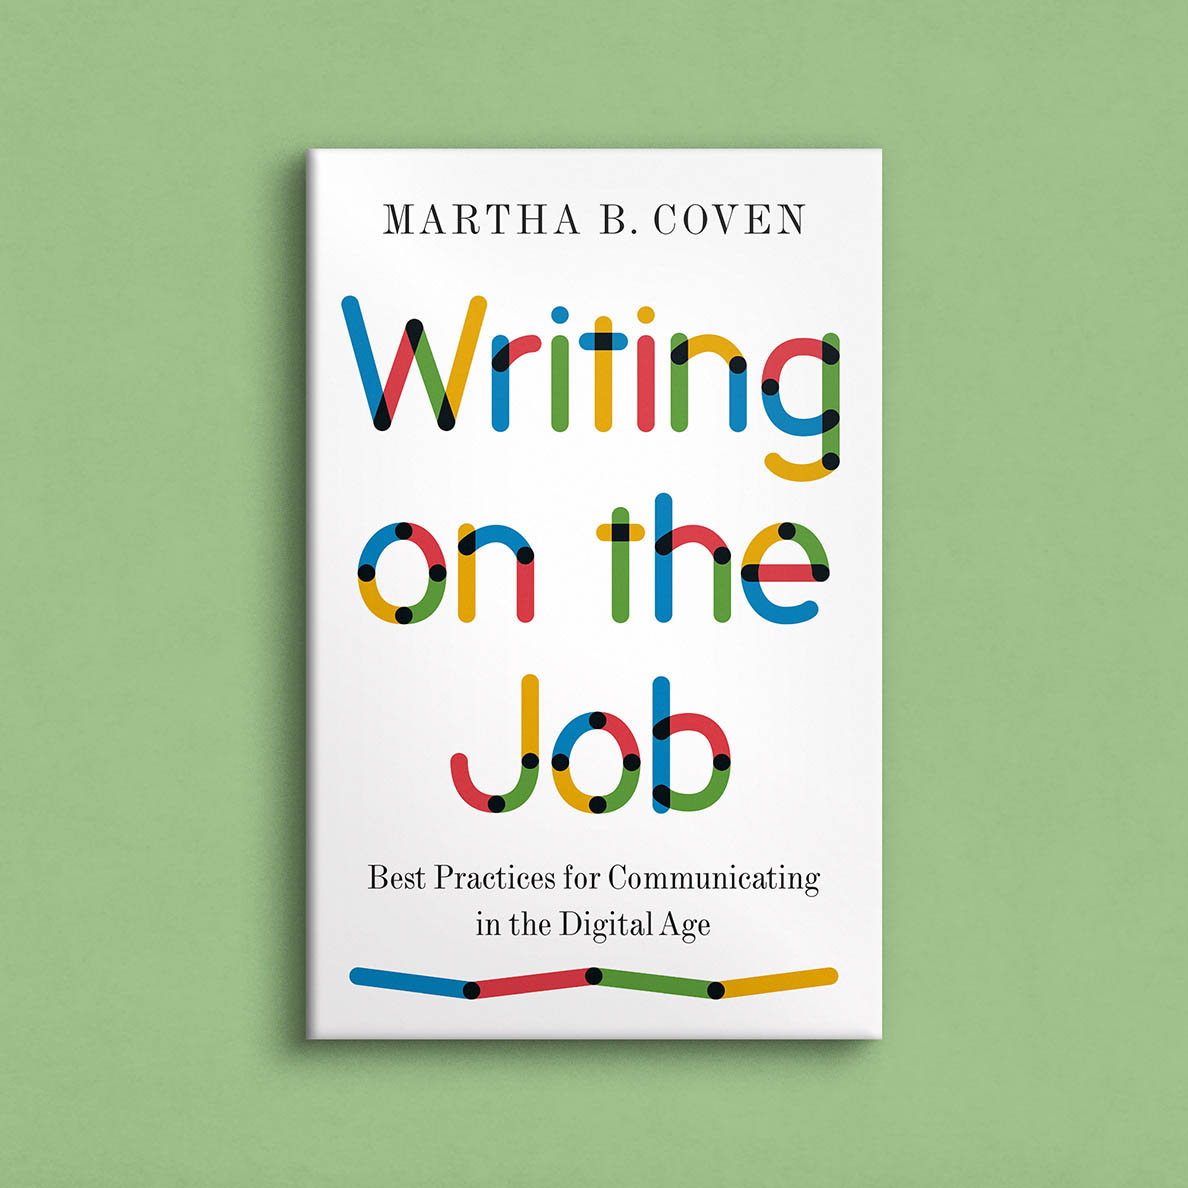 Writing on the Job book cover